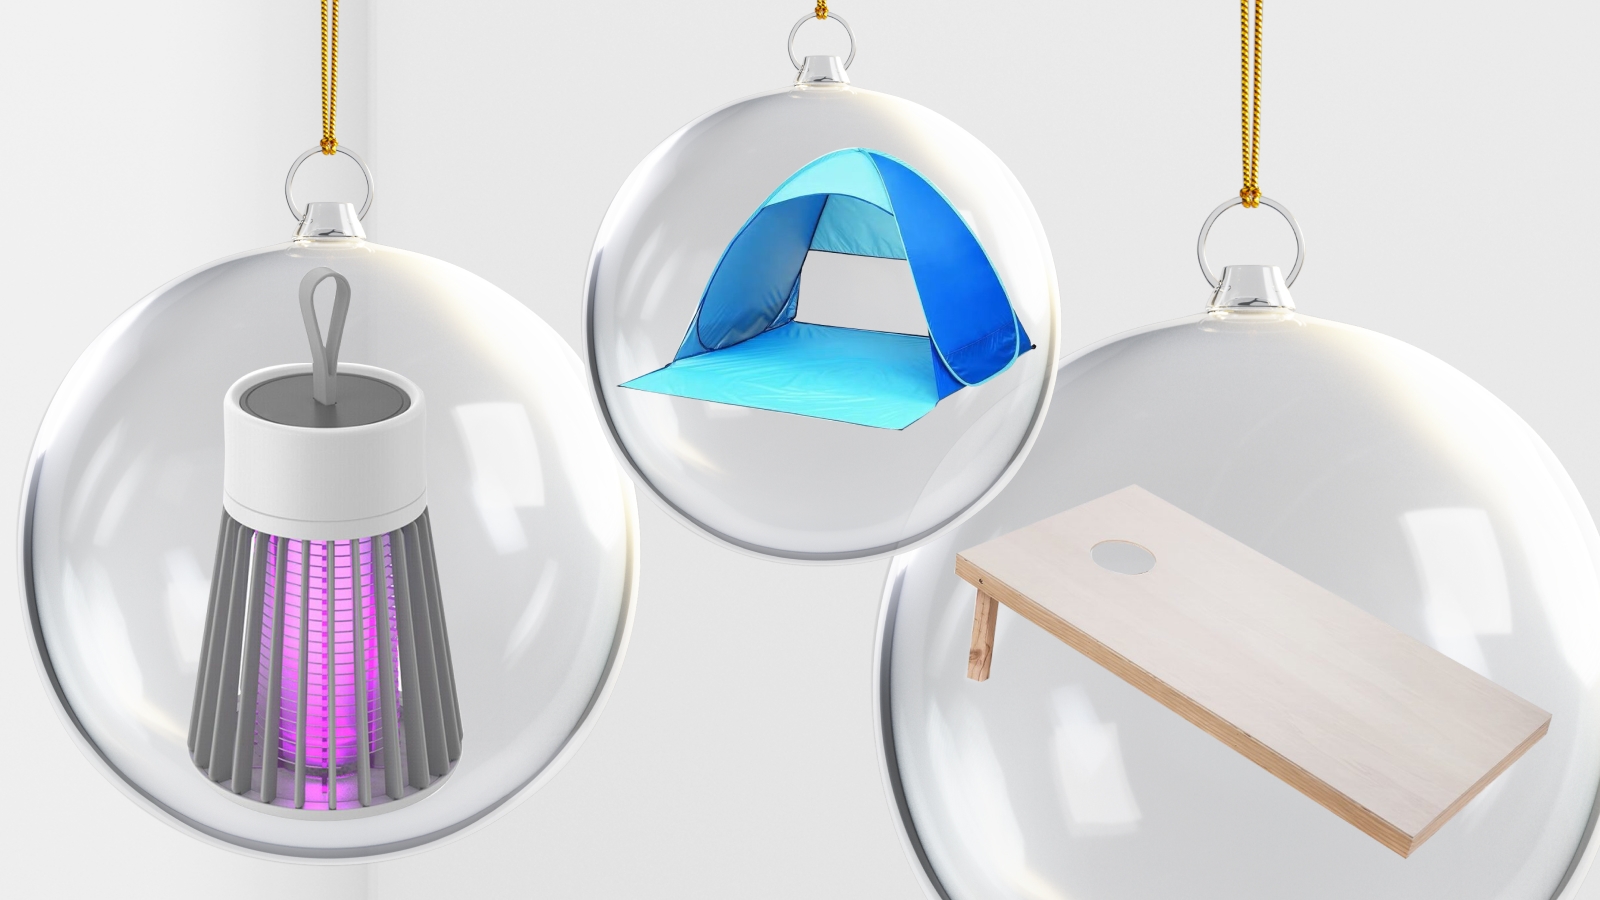 Outdoors gifts hanging in Christmas baubles